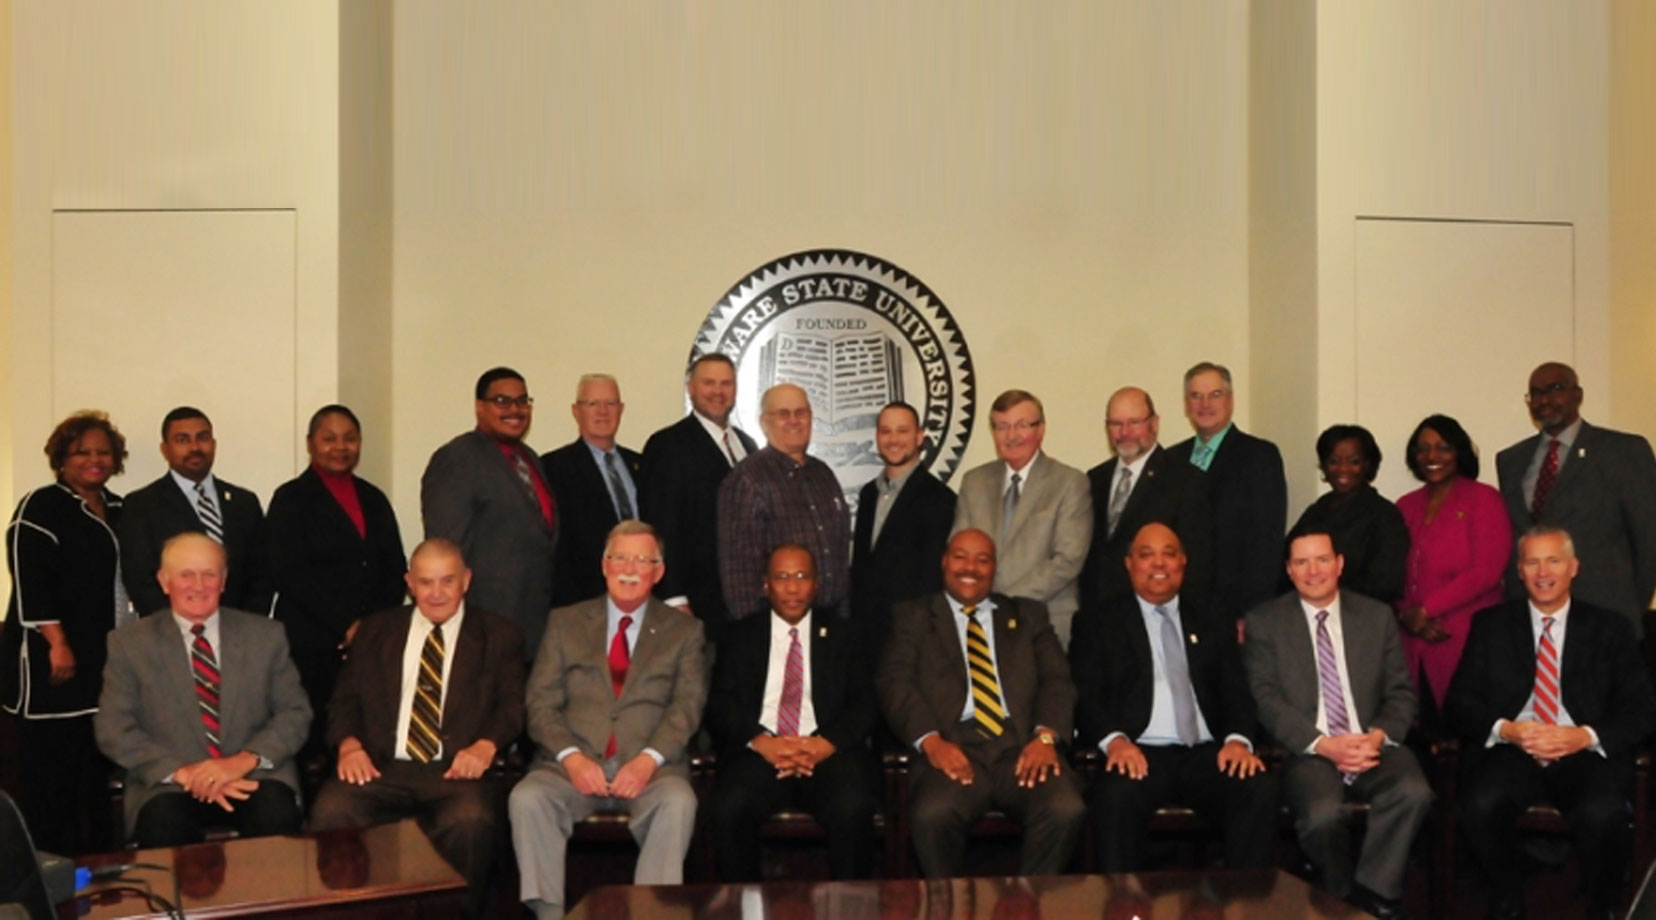 Kent County legislators participate in a photo opp moment with DSU Harry L. Williams, Board of Trustees Chairman David Turner and Vice Chairman Barry Granger along with other University officials.